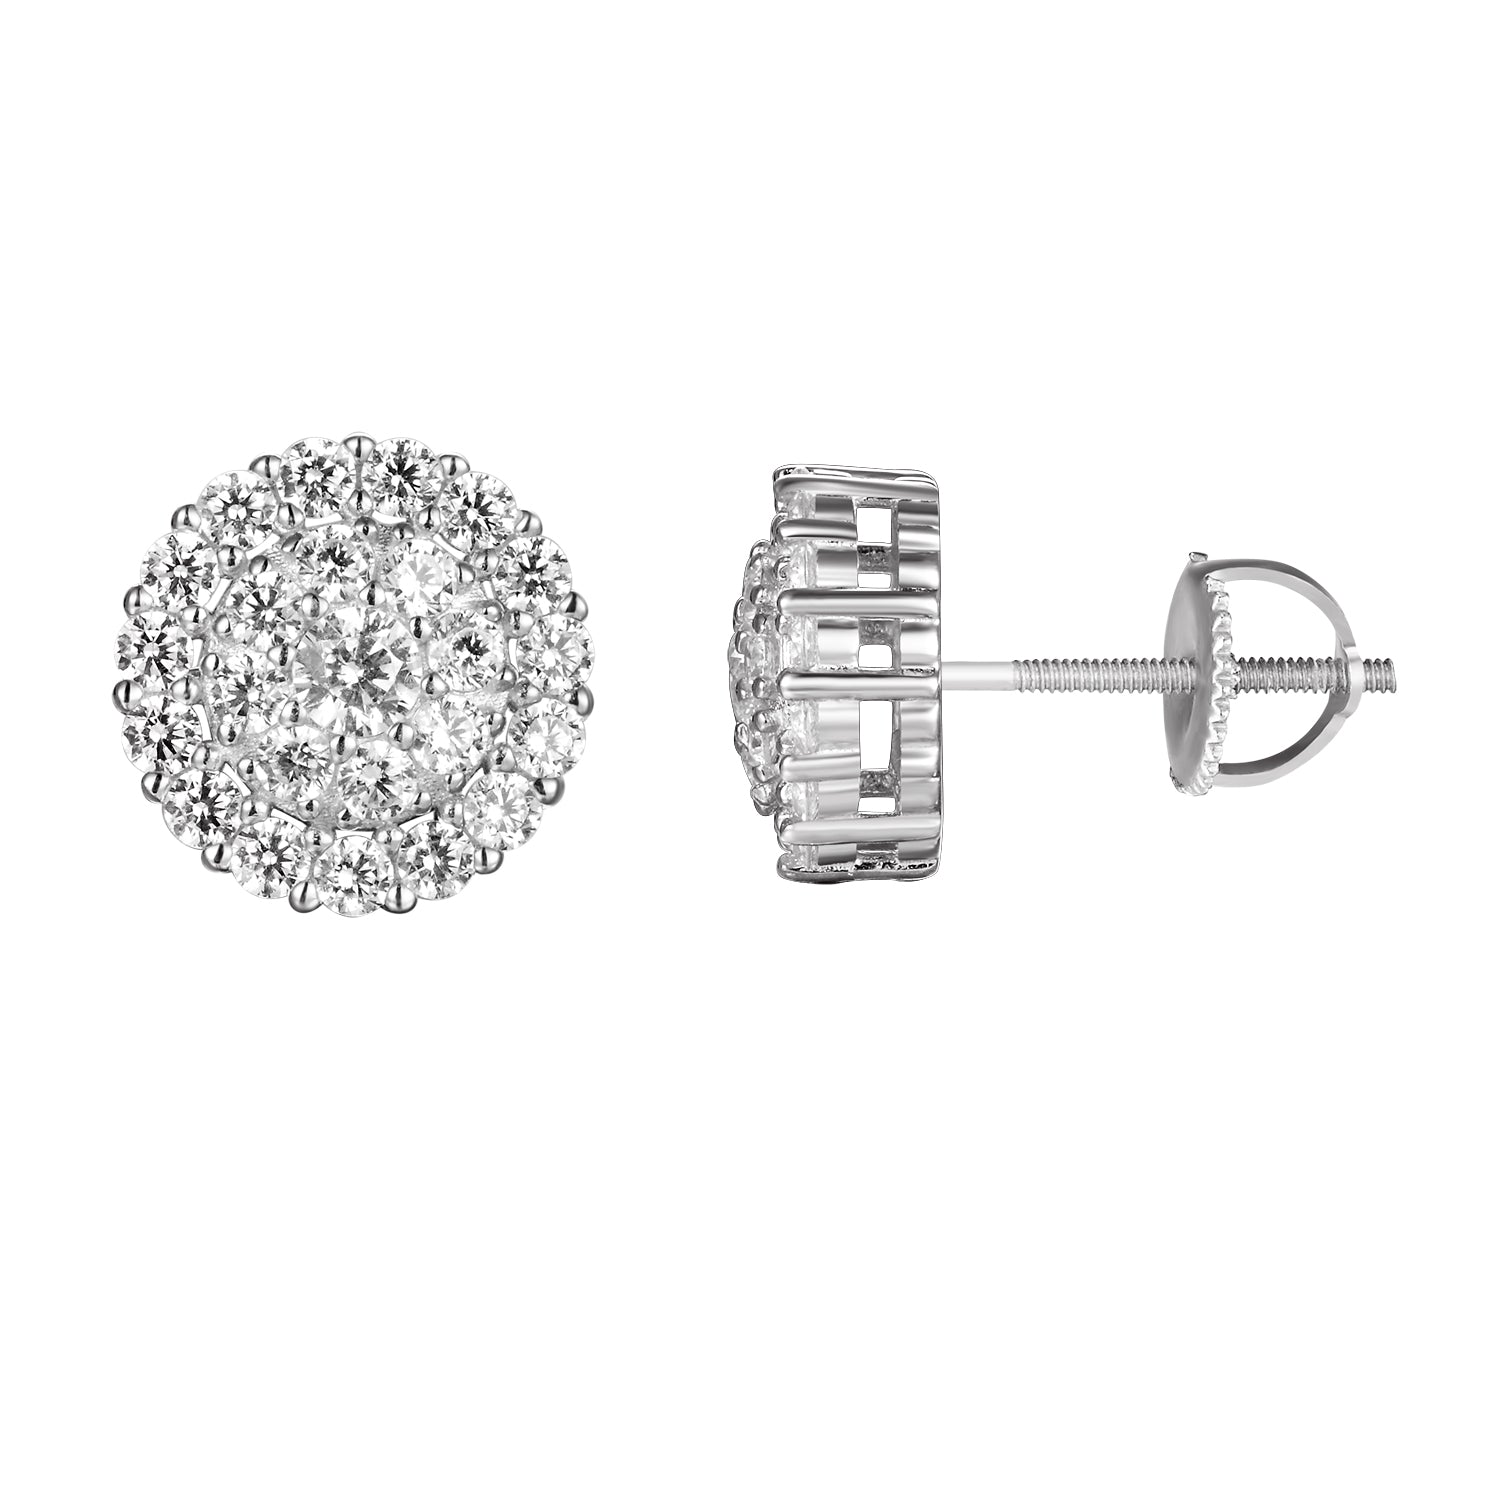 3D Prong Set Solitaire Icy Silver Screw Back Earrings